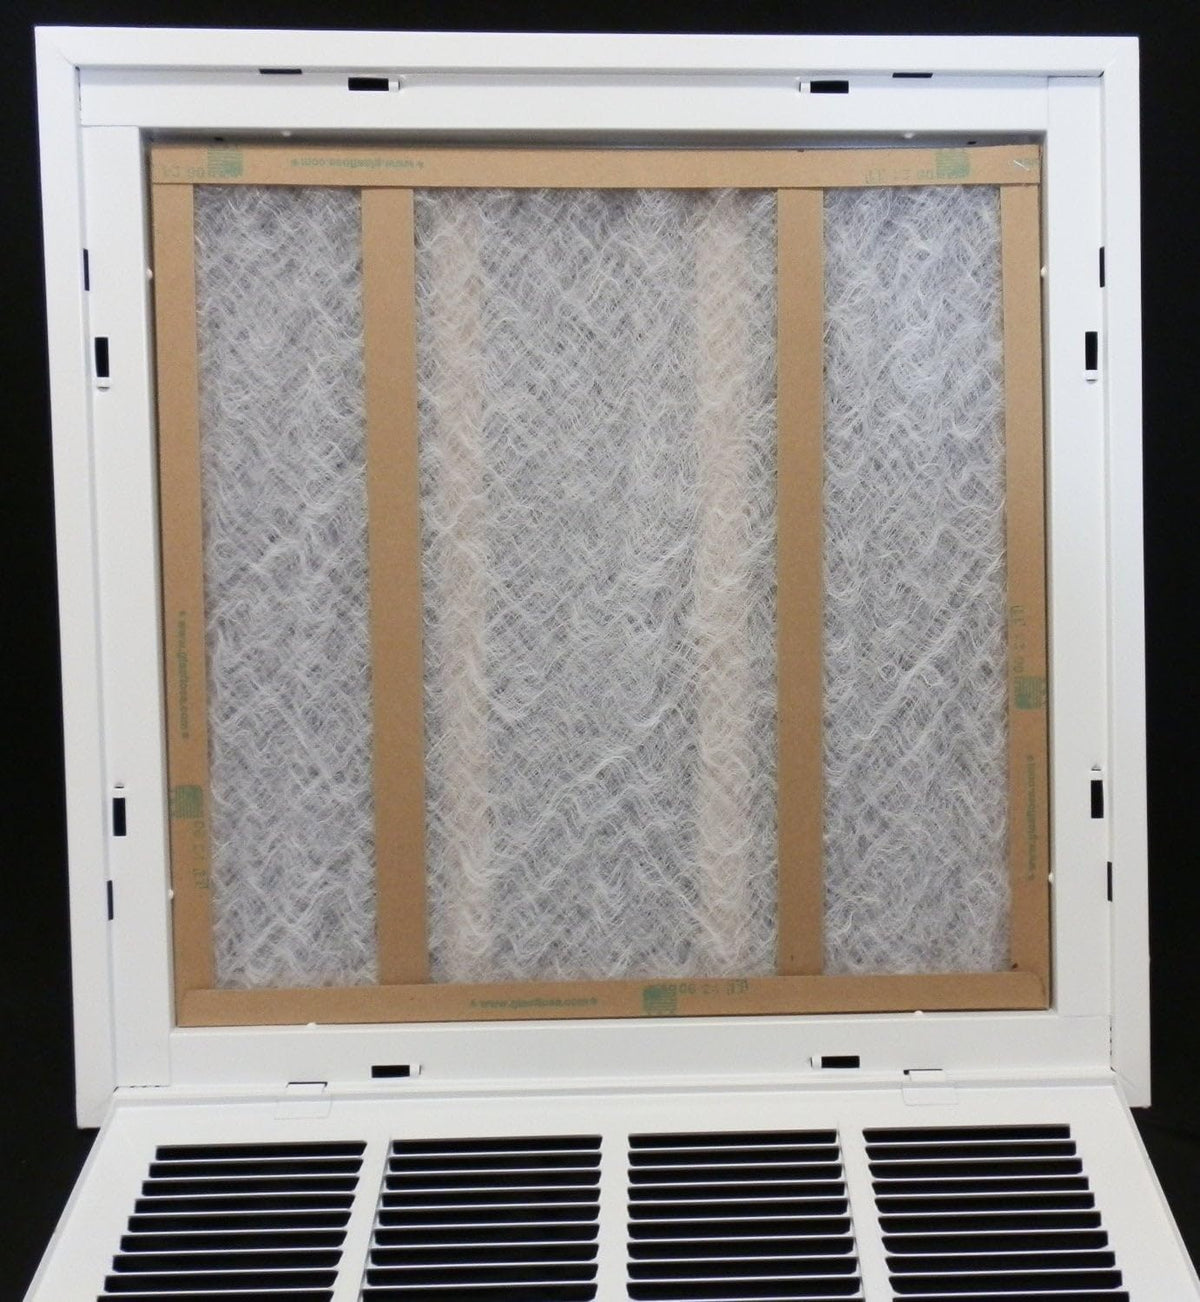 30&quot; X 18&quot; Steel Return Air Filter Grille for 1&quot; Filter - Removable Frame - * Filter Included * [Outer Dimensions: 32 5/8&quot; X 20 5/8&quot;]